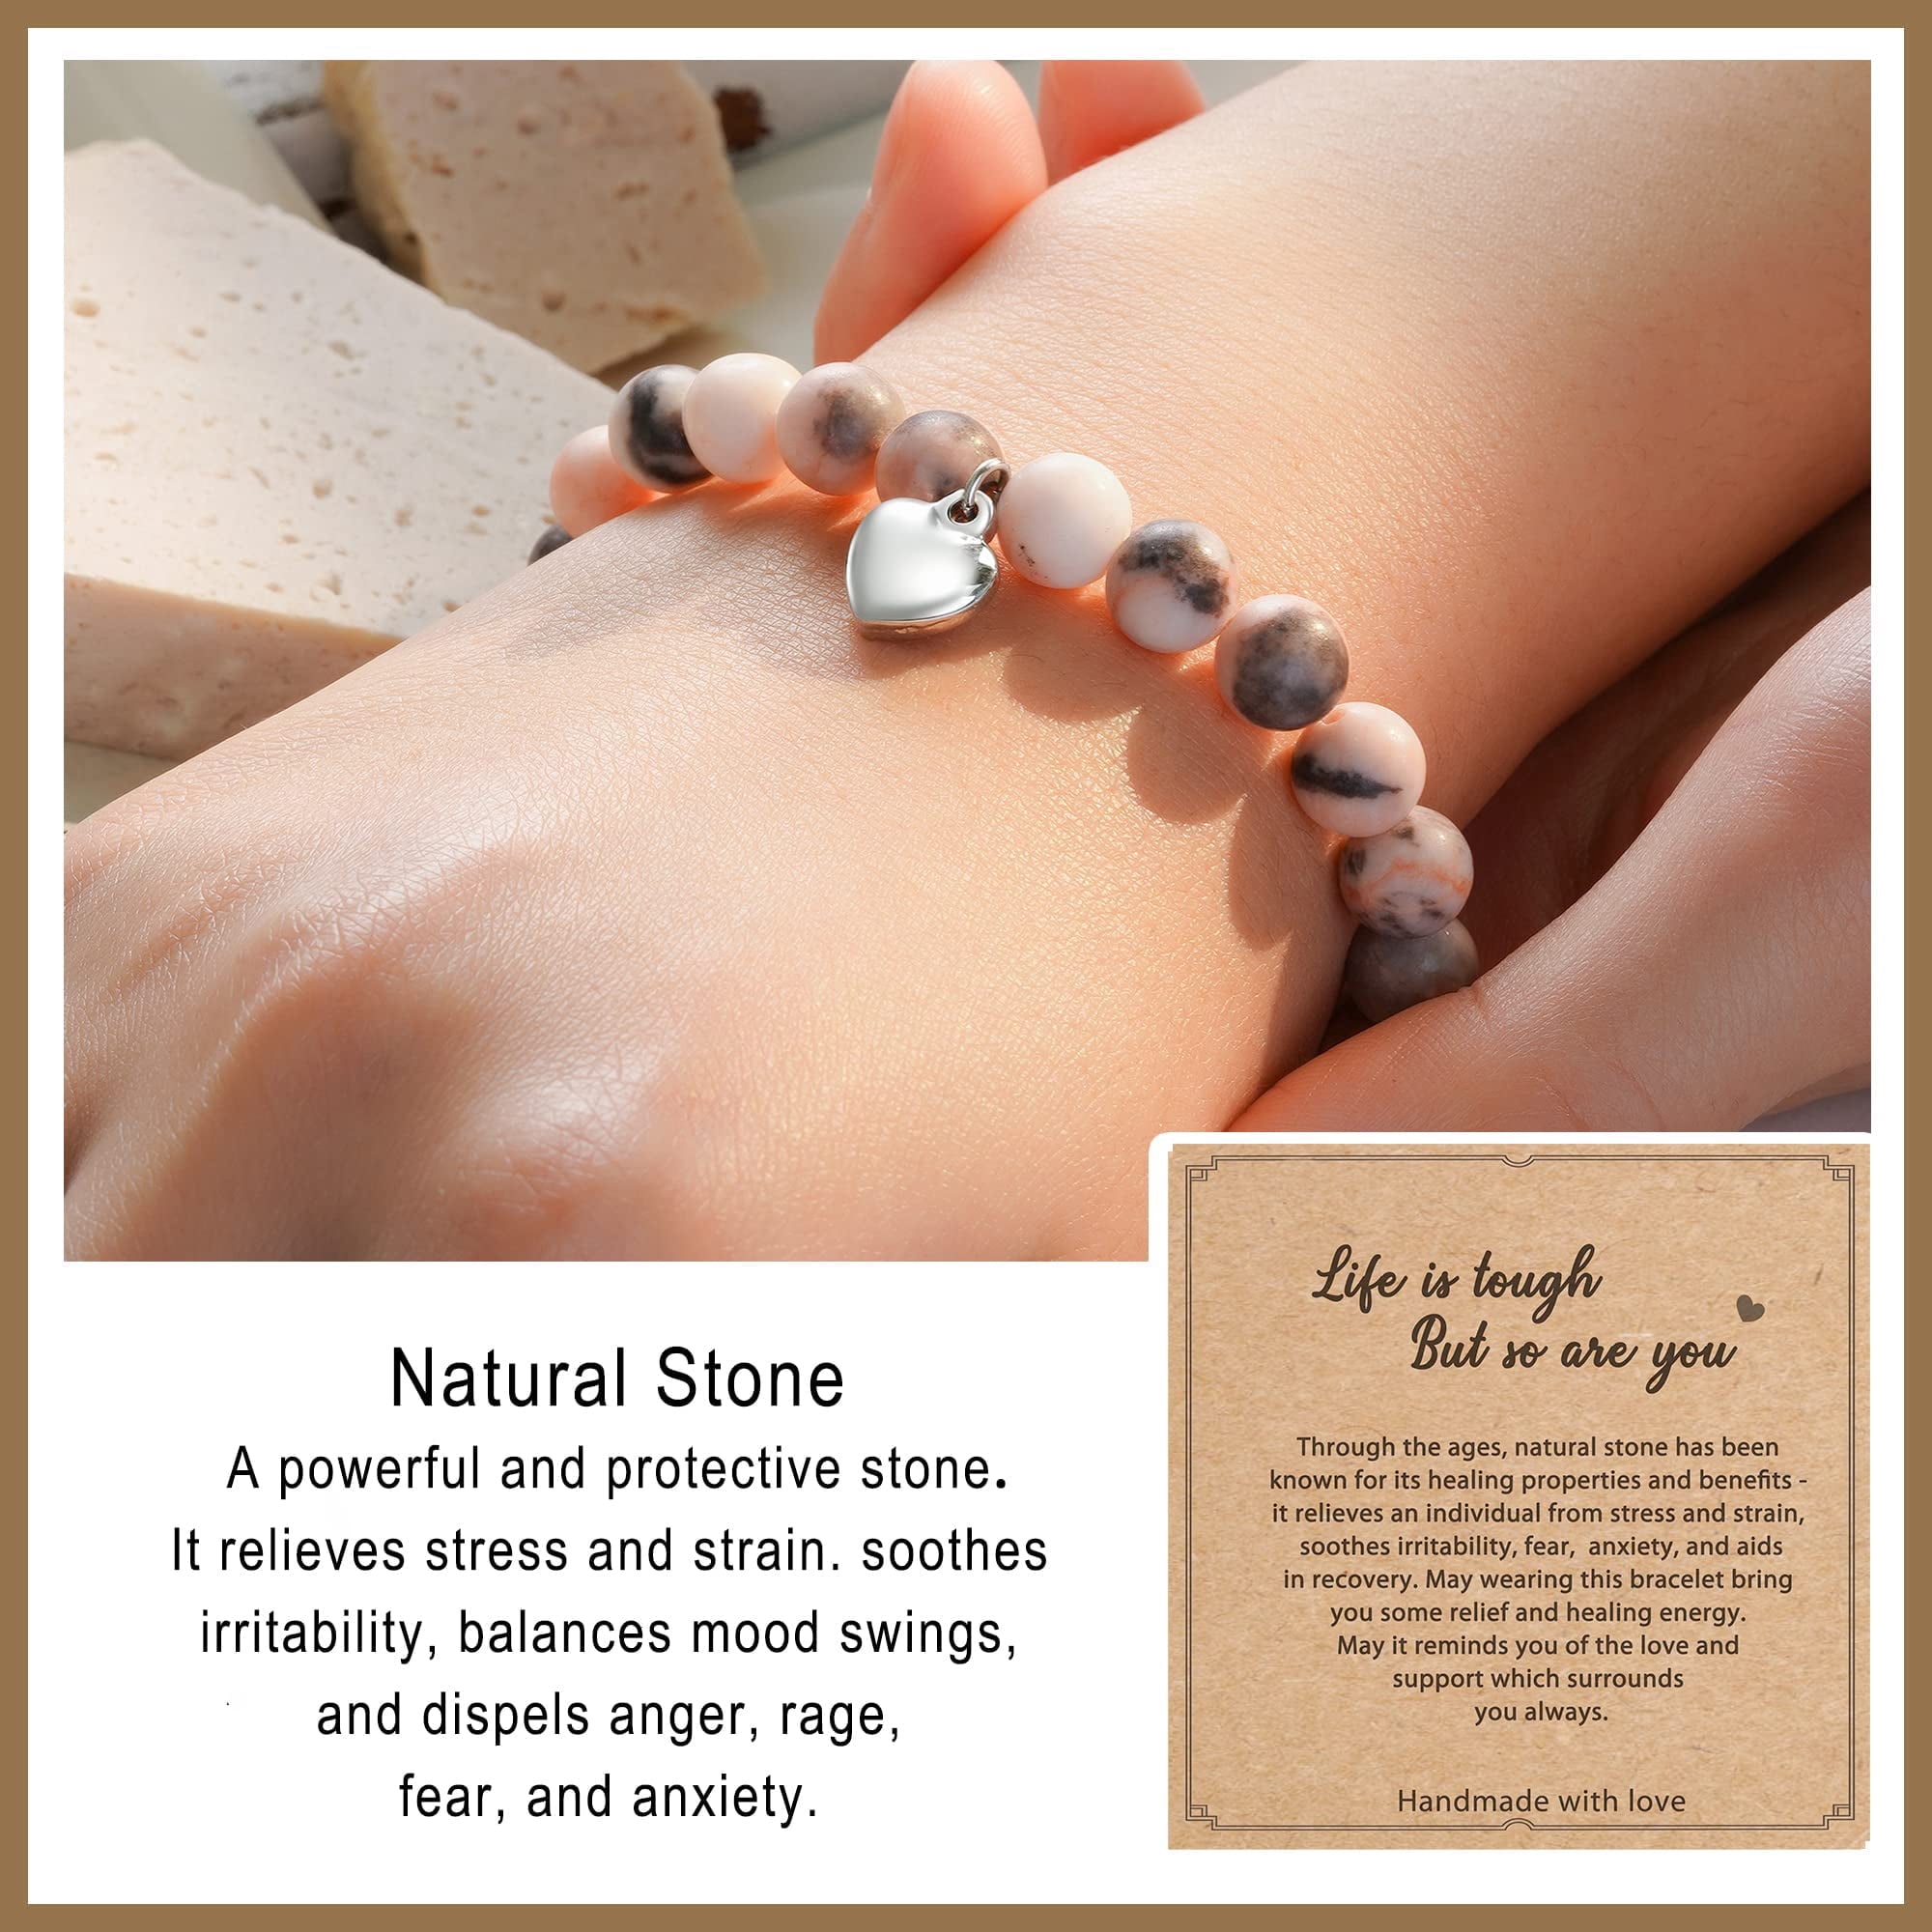 Healing Bracelet For Women Anxiety Crystal Chakra Beaded Bracelets And Stones Calming Stretch Stress Relief Gifts Gray f9009a62 8076 4919 ab82 fa820ab6303c.2cdf24bb33db1b9abed9603df63a07da